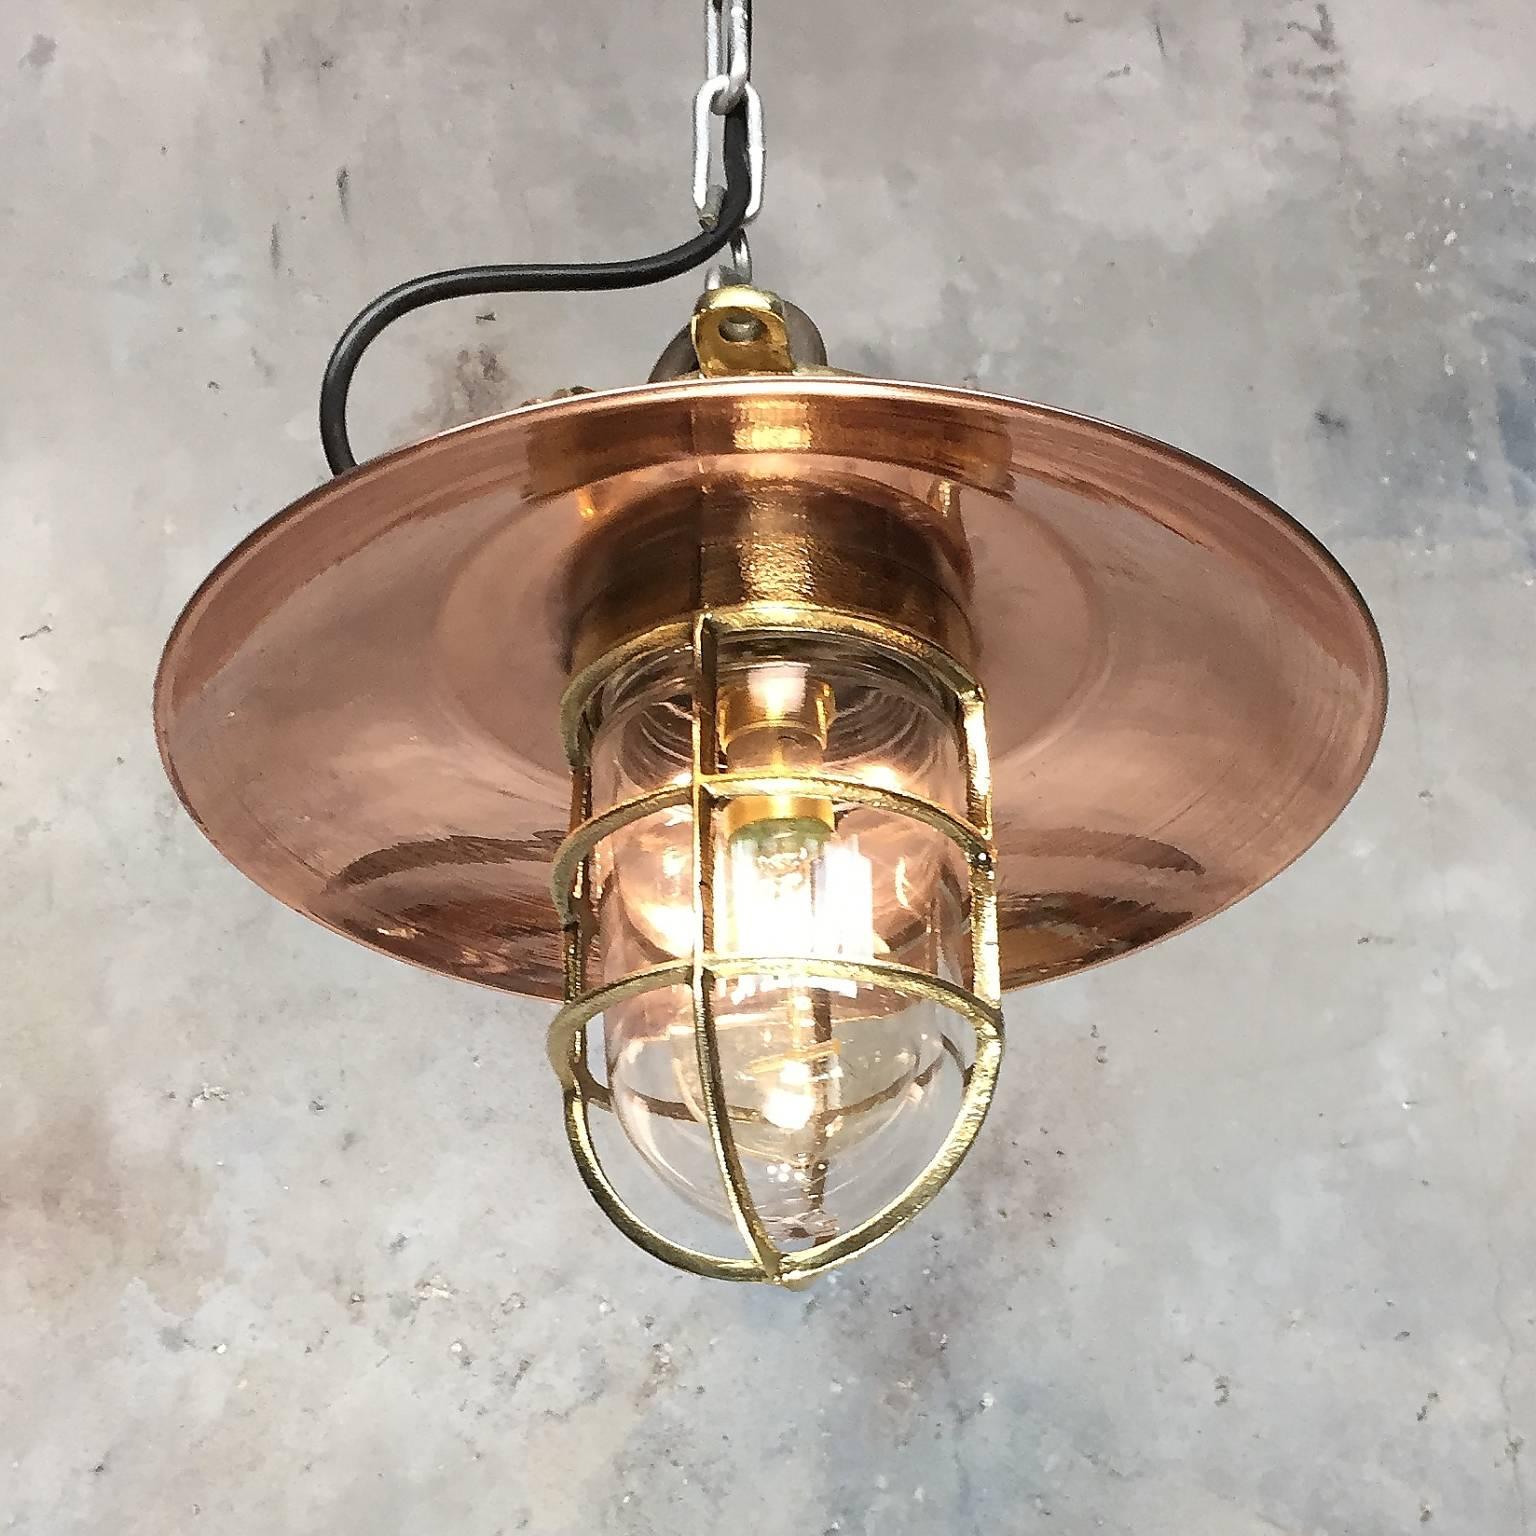 Industrial 20th Century Brass and Copper Explosion Proof Pendant, Glass Dome, Edison Bulb